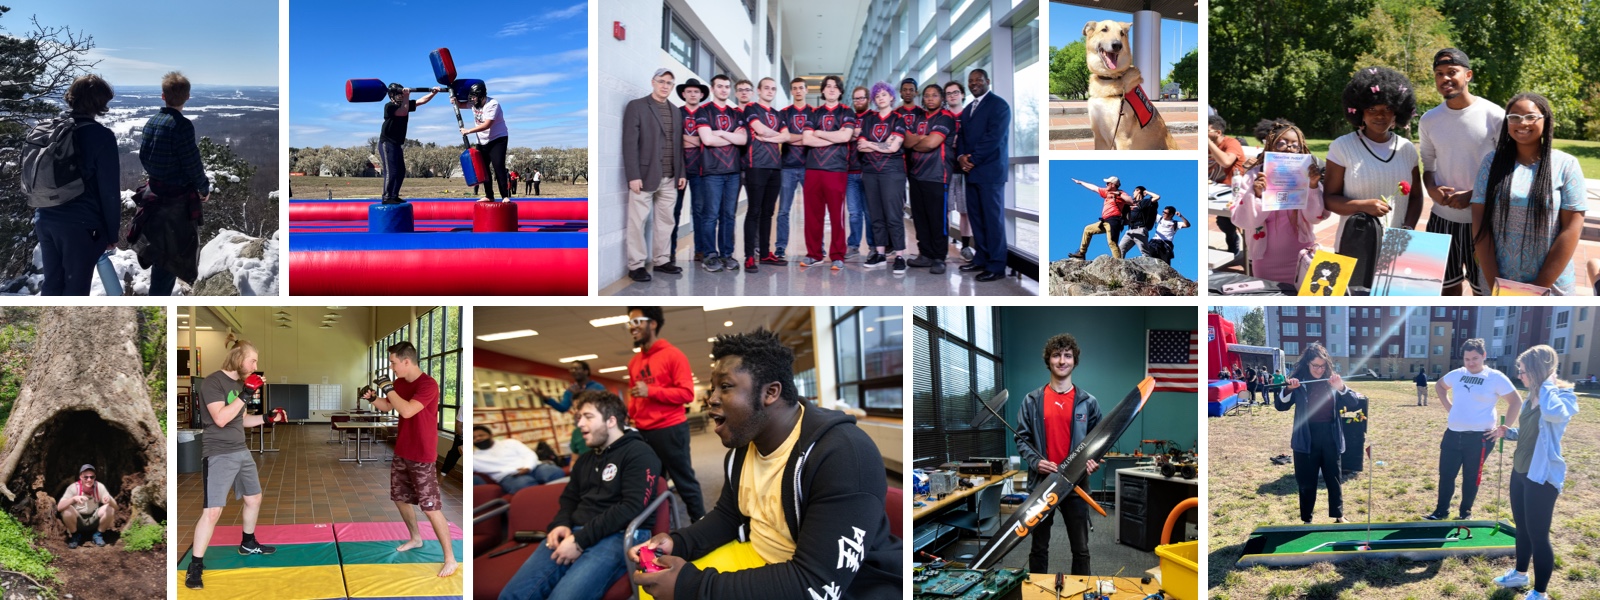 Collage of student photos from activities on campus